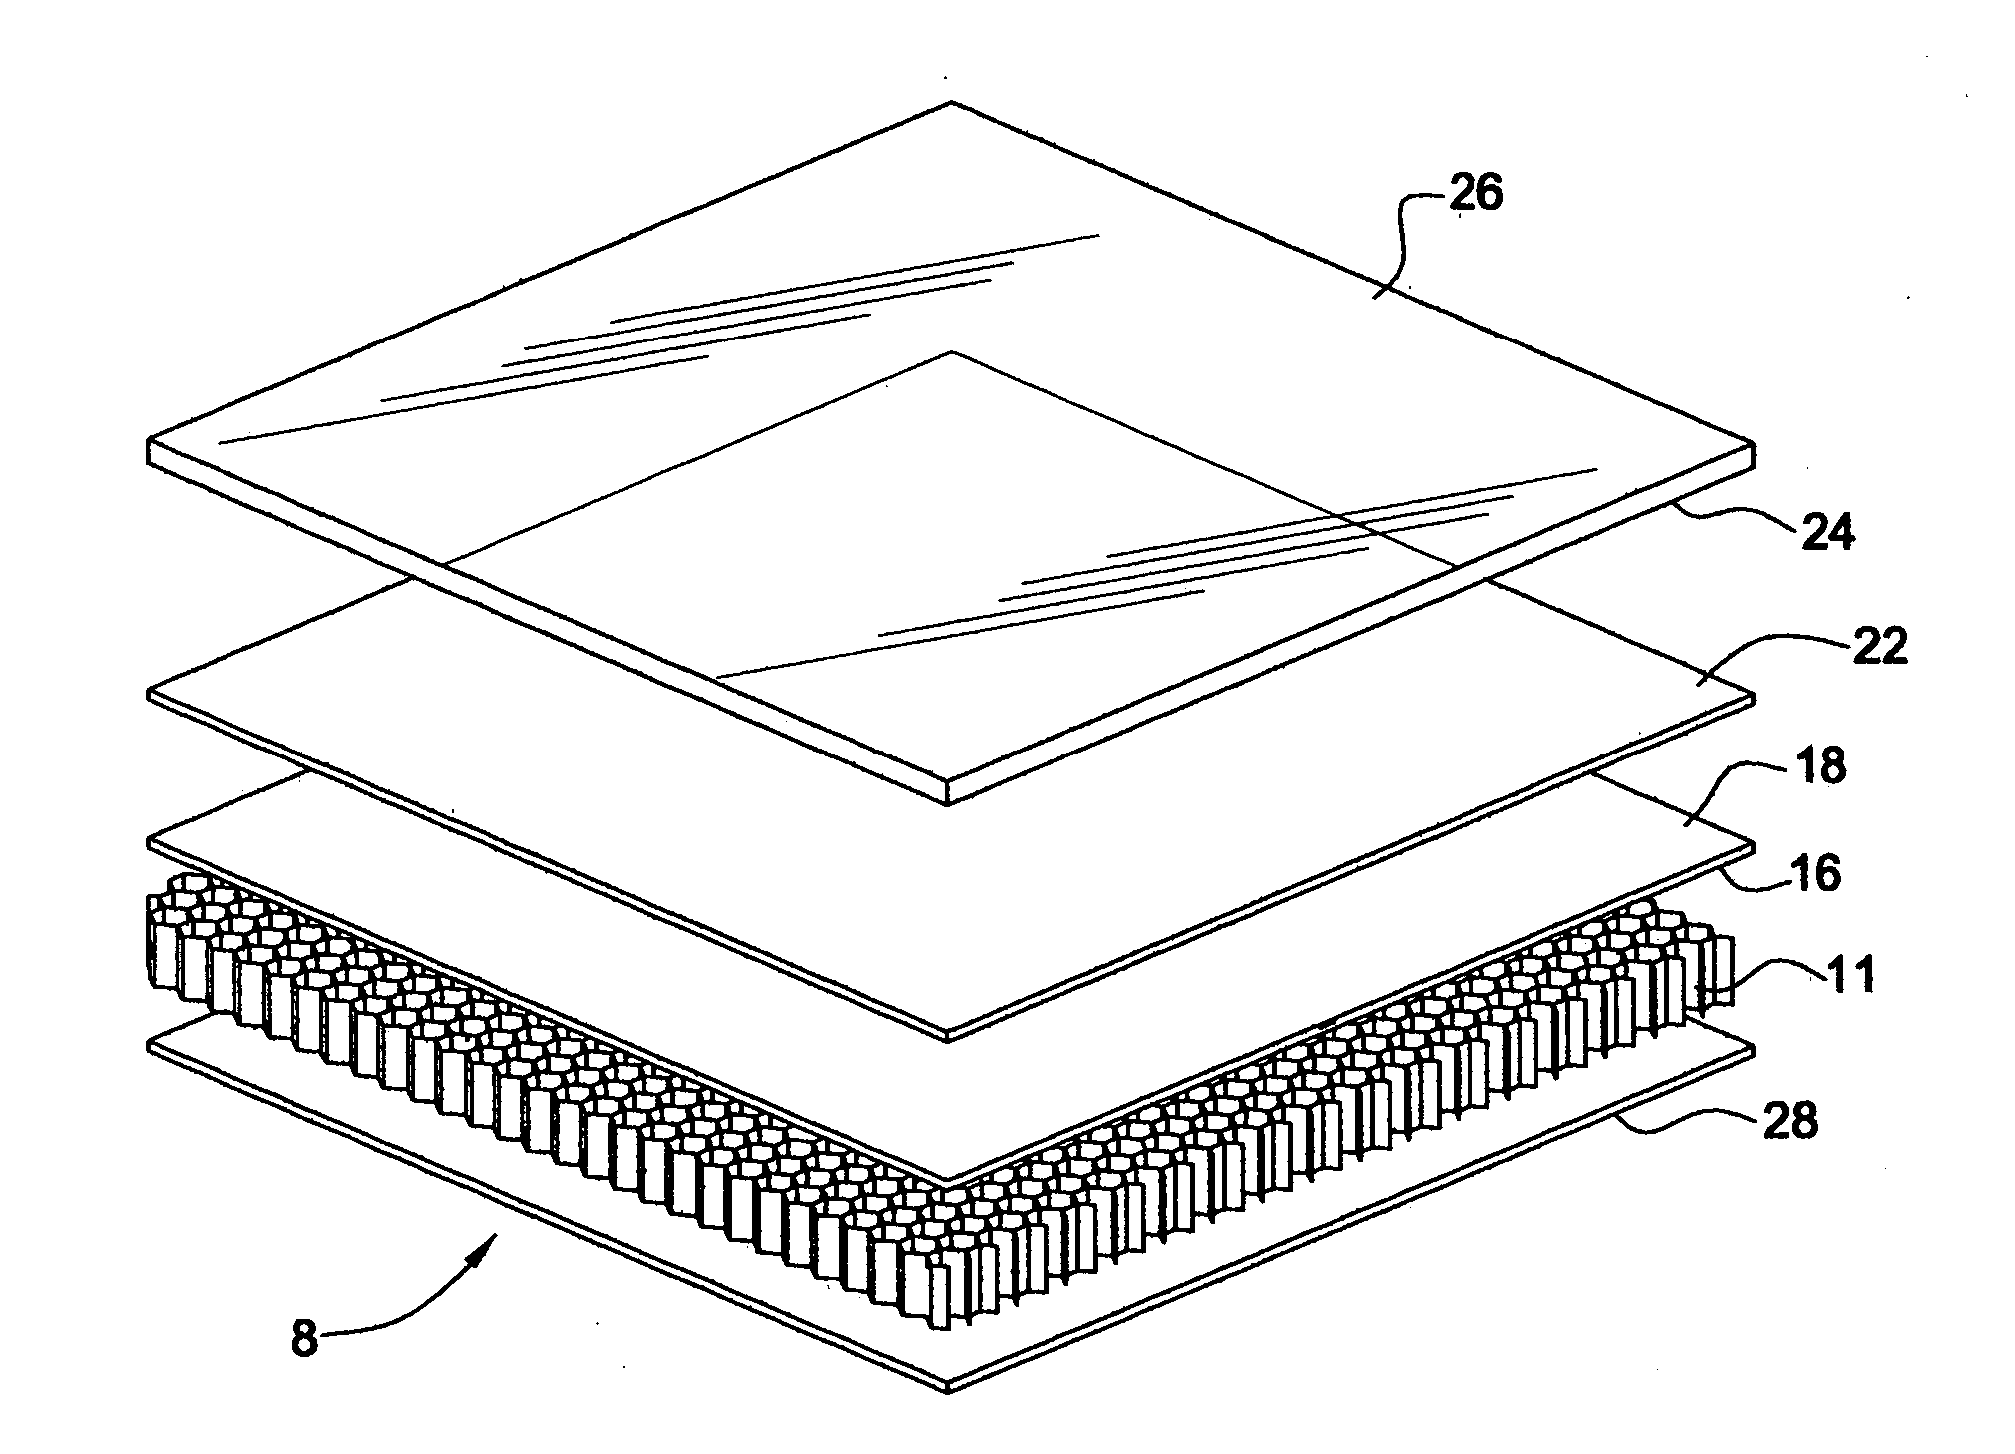 Single panel glass structural panel and method of making same